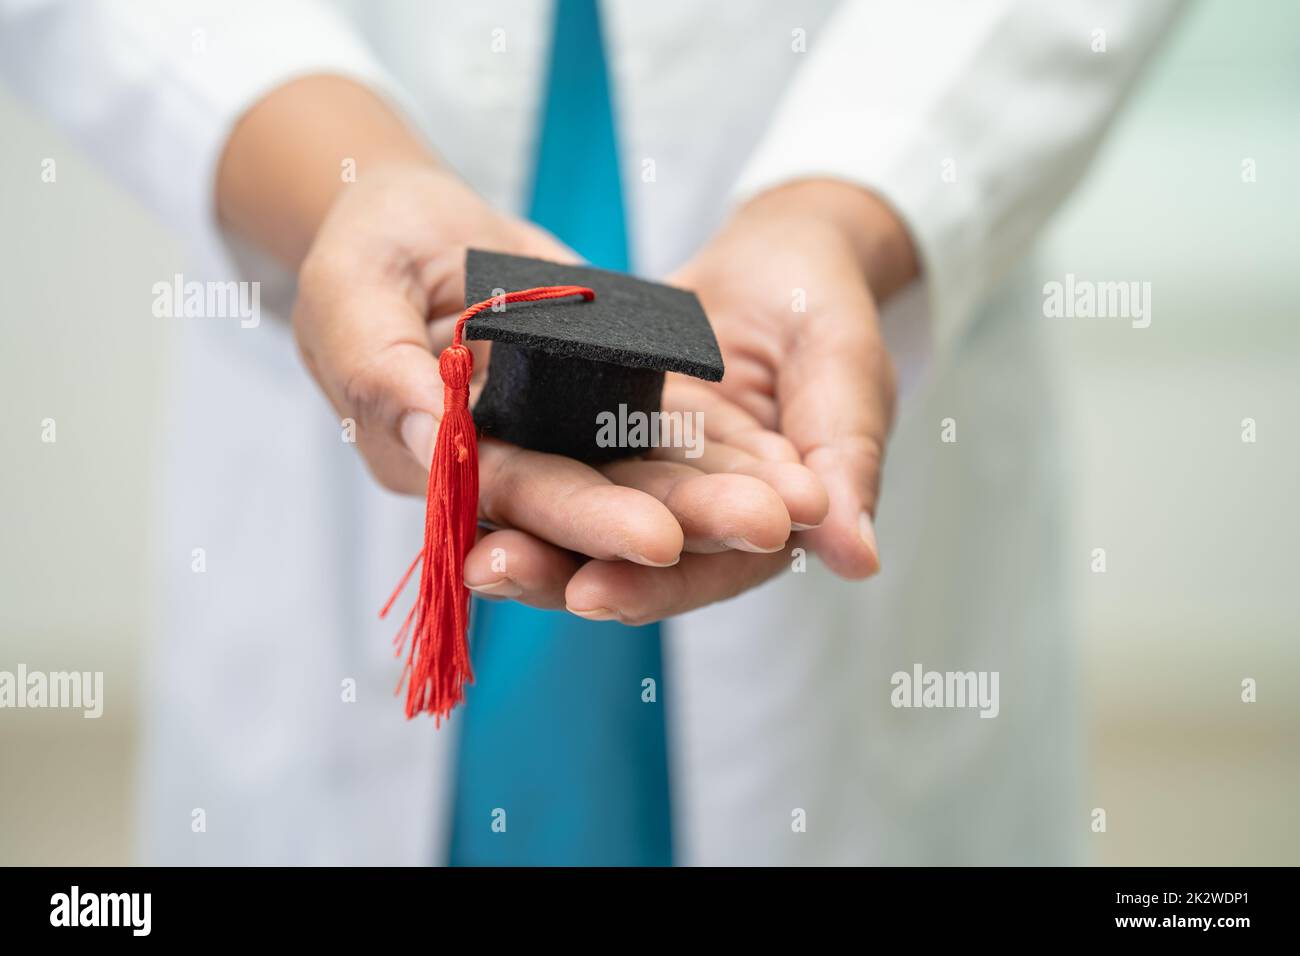 Asian doctor study learn with graduation gap hat in hospital ward, clever bright genius education medicine concept. Stock Photo